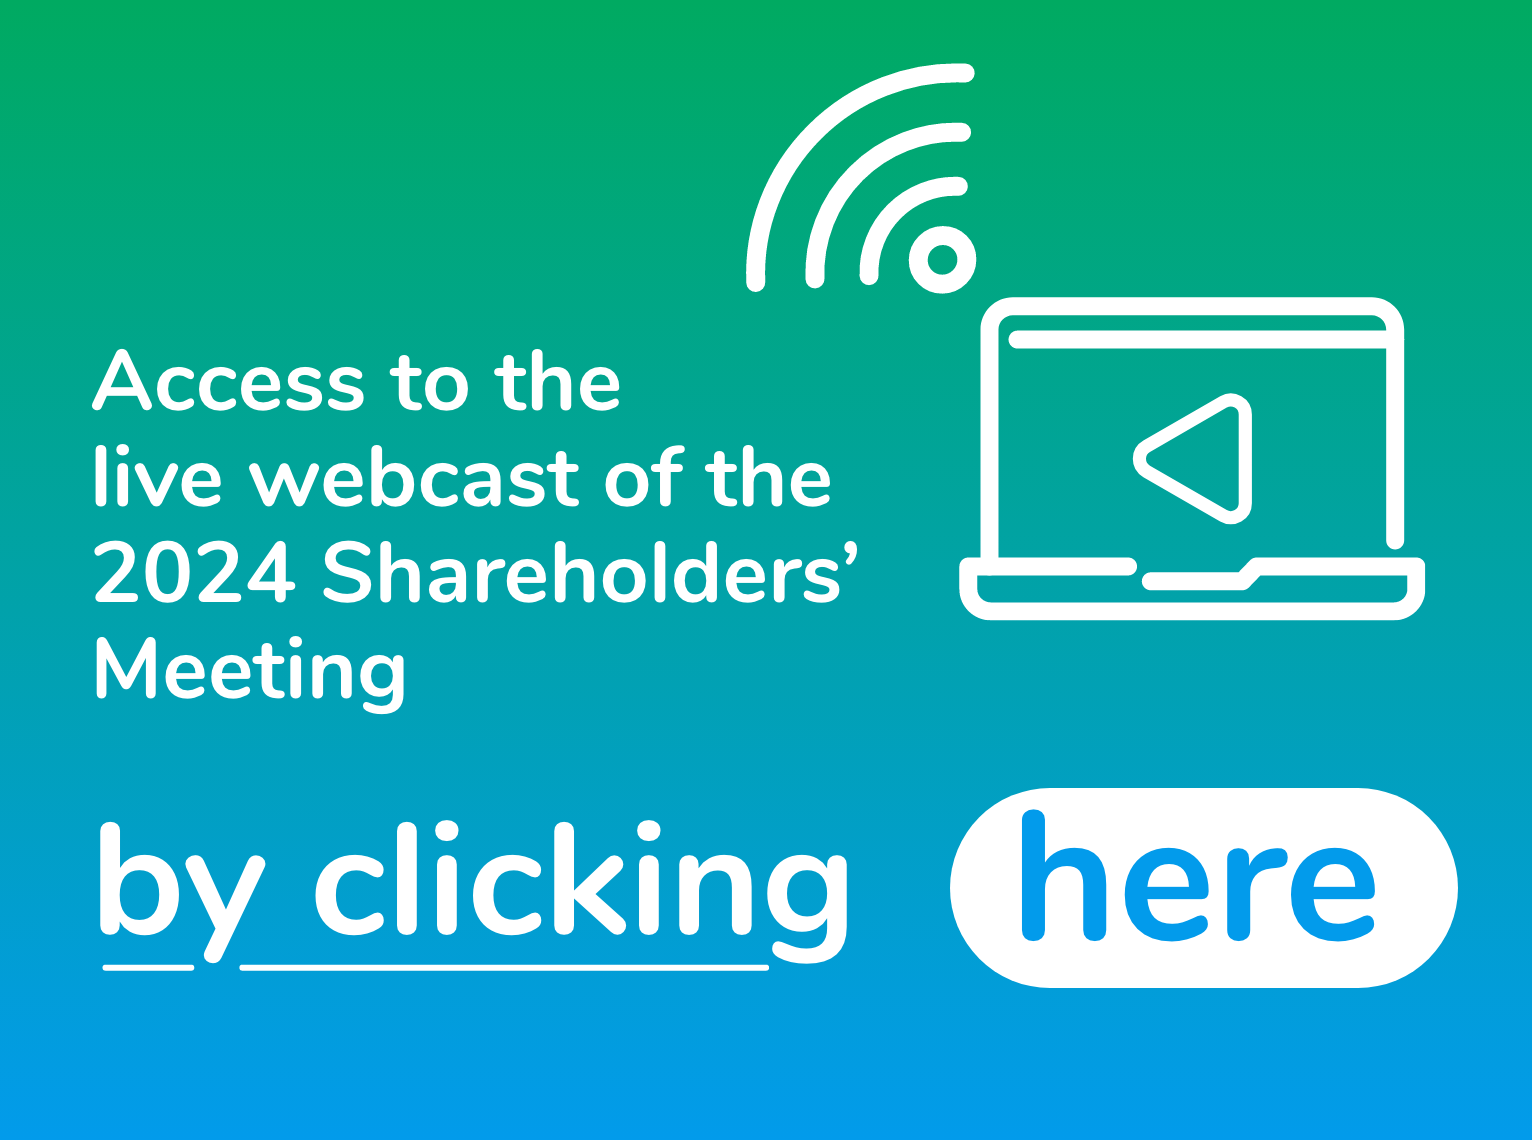 Access to the live webcast of the 2024 Shareholders' Meeting by clicking here